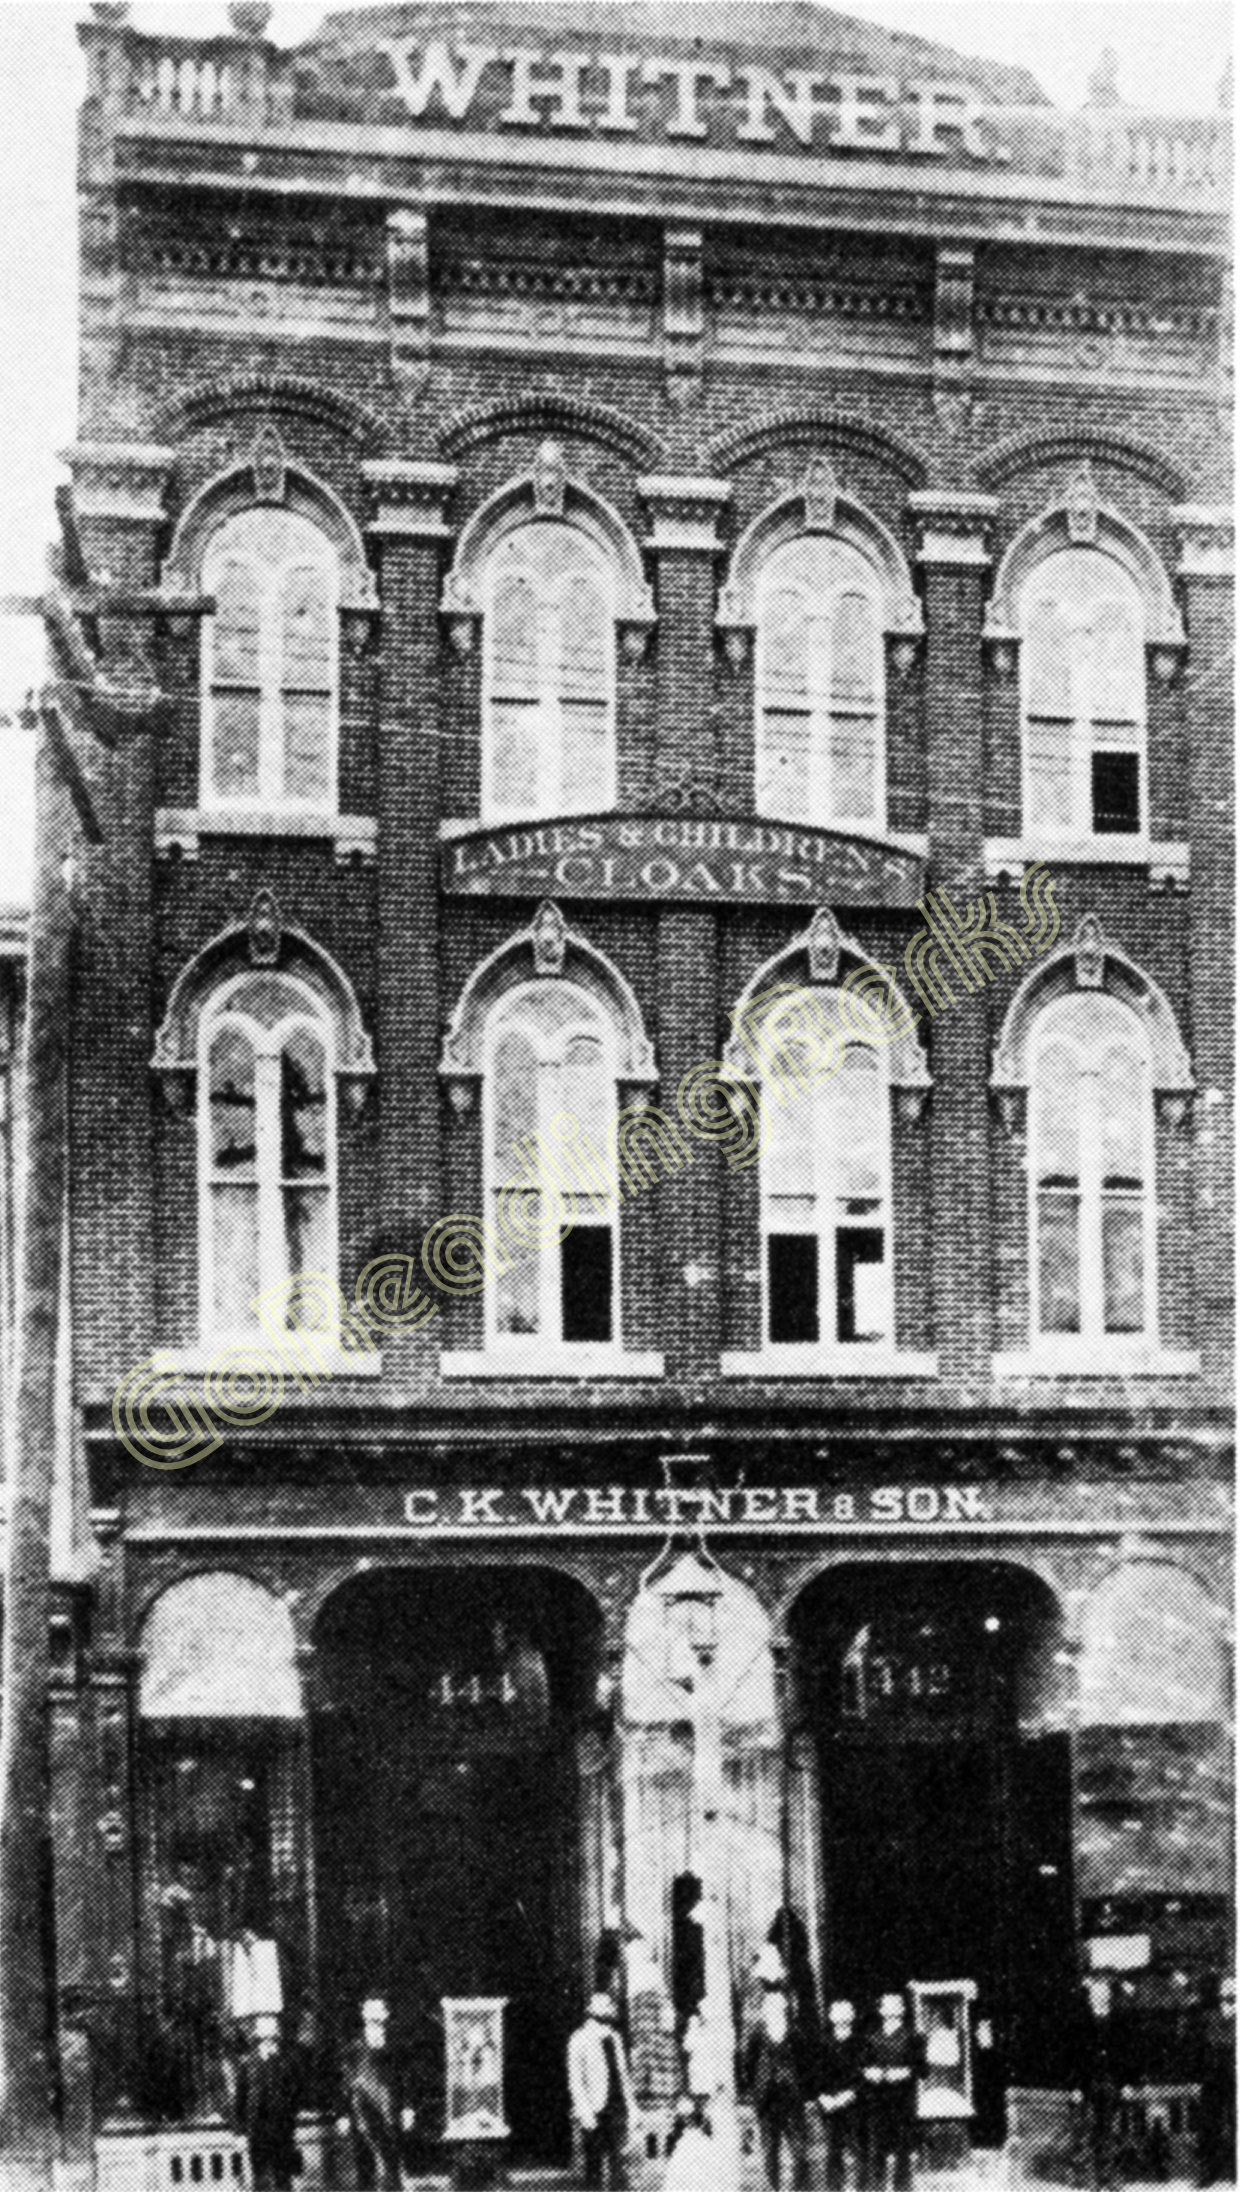 Like the predecessors of many other Penn street establishments, Mr. Whitner's first store was confined entirely to the first floor of a converted dwelling. It handled a line of dry goods and notions. All the selling space was on the first floor while a portion of the basement and second floor were used for receiving rooms and storage. The room available for selling space was typical of the first floor facilities of any large dwelling in those days. It contained less than 2,000 square feet in a room of about 20 by 90 feet. A newspaper description gives the following account of store's opening: "Mr. Calvin K. Whitner will open today at 432 Penn street, a new dry goods store, with an entire new stock. Mr. Whitner is one of our most careful and energetic businessmen, and having had long experience, will be able to conduct his establishment on first-class principles. The opening today, it is expected, will be largely attended by the ladies of this city, to whom every facility will be extended for a thorough examination of the stock." As recorded in Whitner's ledger, first-day sales total $159. Each day the volume grew and at the end of the first year he was able to report that his total sales had aggregated slightly less than $37,000. It was only six years after the store was opened that the need for larger quarters was felt. So business and stocks were transferred in 1883 to the buildings at 442-444 Penn Street. The store building at 444 Penn Street had been vacated by Dives, Pomeroy & Stewart. Mr. Whitner conducted the business by himself individually until 1889 when his son, Harry K. Whitner was taken into the firm. The firm traded as C. K. Whitner & Son until the son's death in December, 1890. More departments were added and in 1891 additional expansion was accomplished by extending back to Cherry Street. In 1896, a faithful employee for many years, John A. Britton, was admitted as a partner, and the firm name became C. K. Whitner & Co. One year later, in 1897, rooms at 438 and 440 Penn street were added and in 1899 more space toward Cherry Street was utilized. The department store continued to expand and, by 1910, a four-story main building stood on Penn Street, with a five-story structure in the rear on Cherry Street. At the completion of the expansion and modernization more than 60,000 square feet of floor space was available, including warerooms.